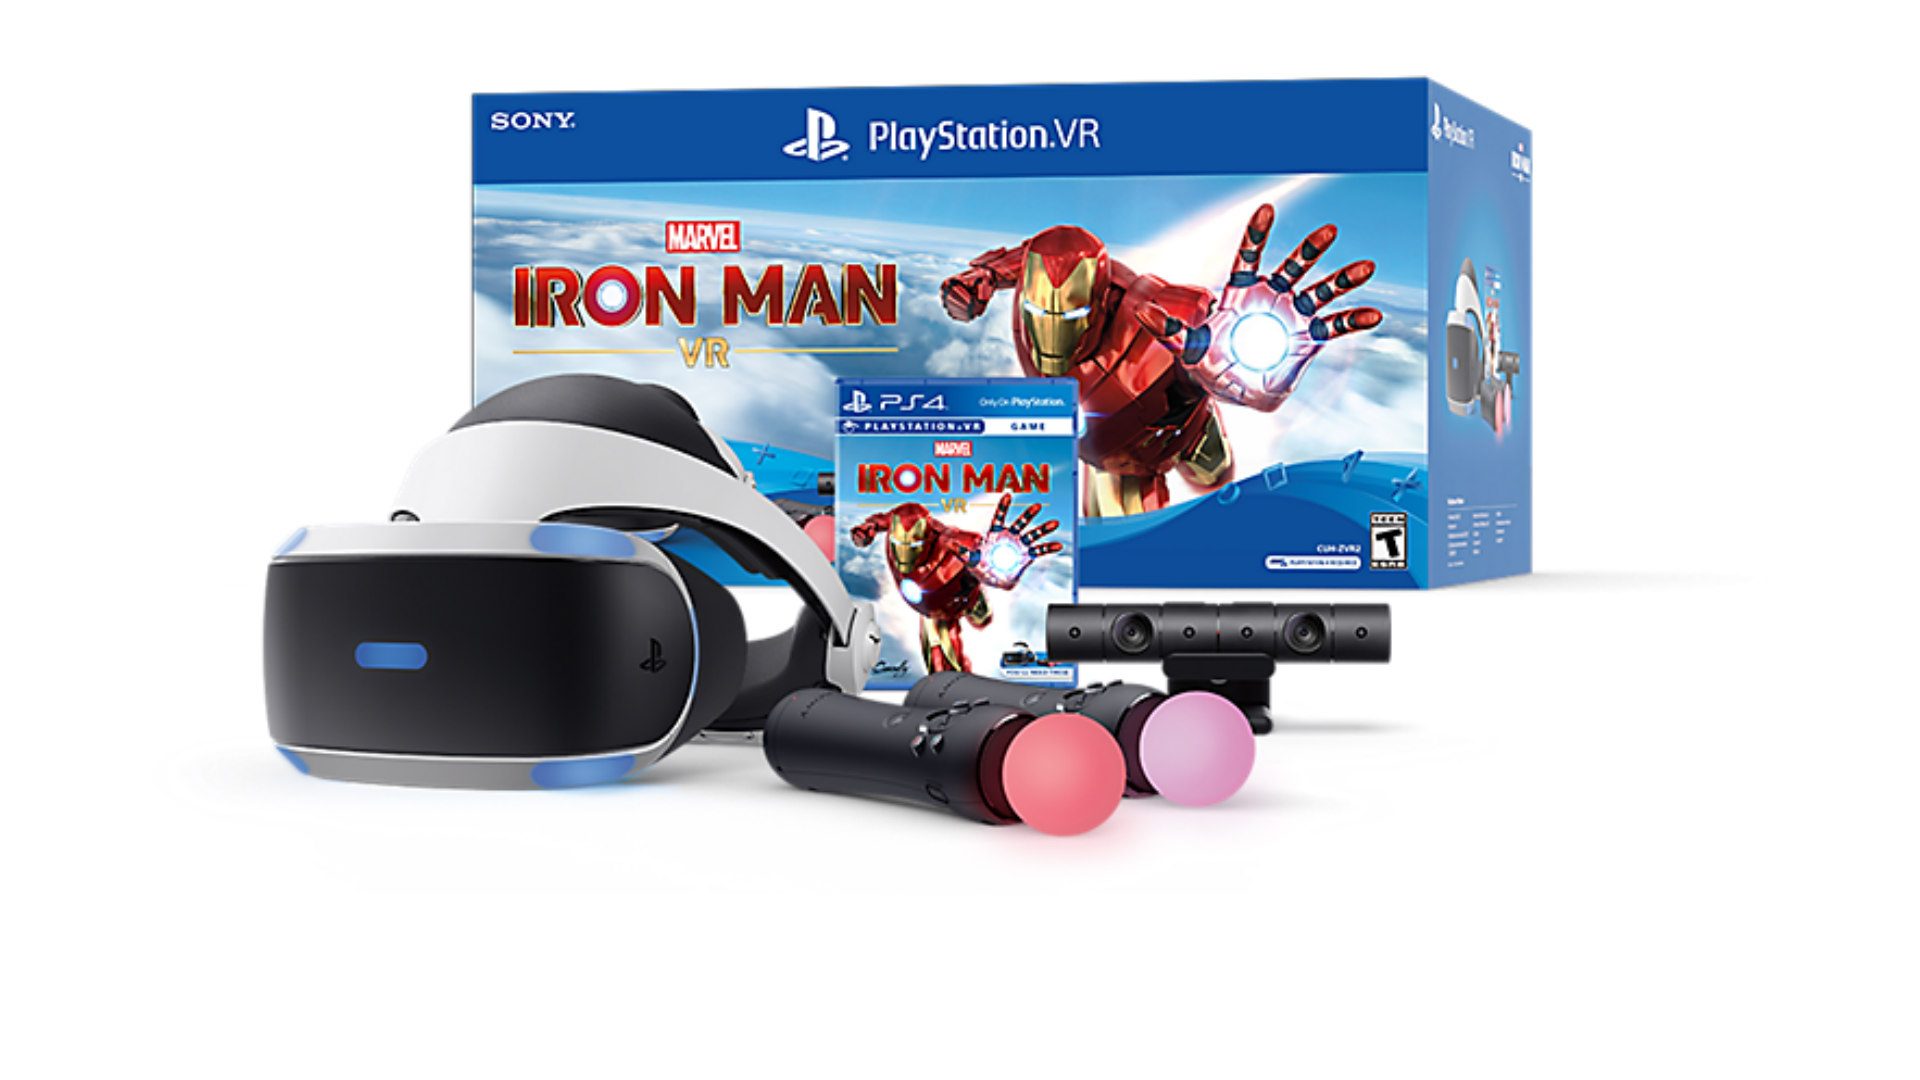 Sony: Iron Man PSVR Bundle to Include PS4 Camera Adapter in US